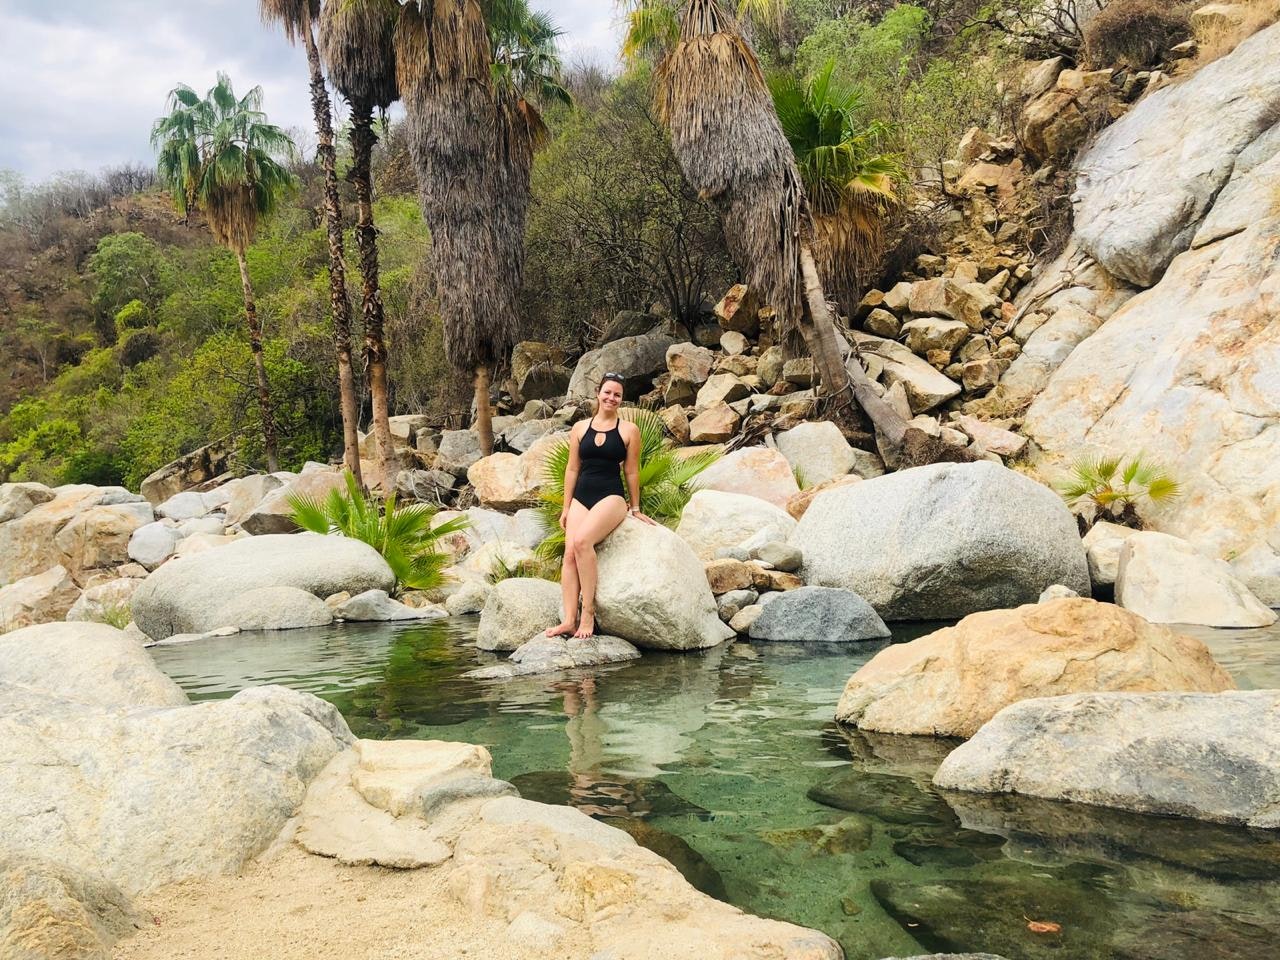 A woman in a black swimsuit poses against the rocks surrounding a hot spring.